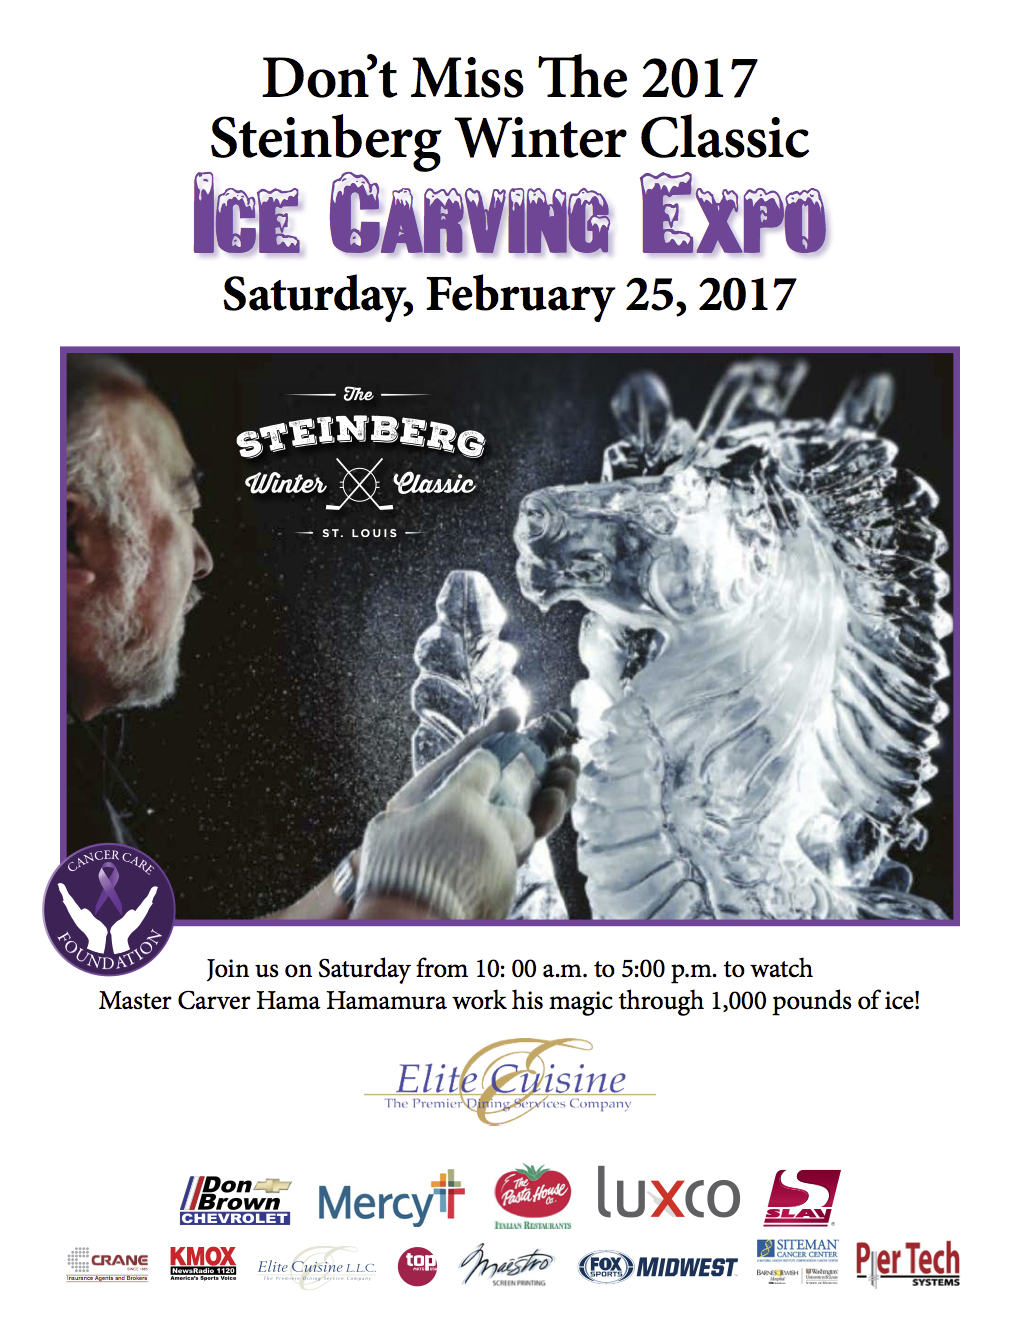 Ice Carving Expo at the Steinberg Winter Classic